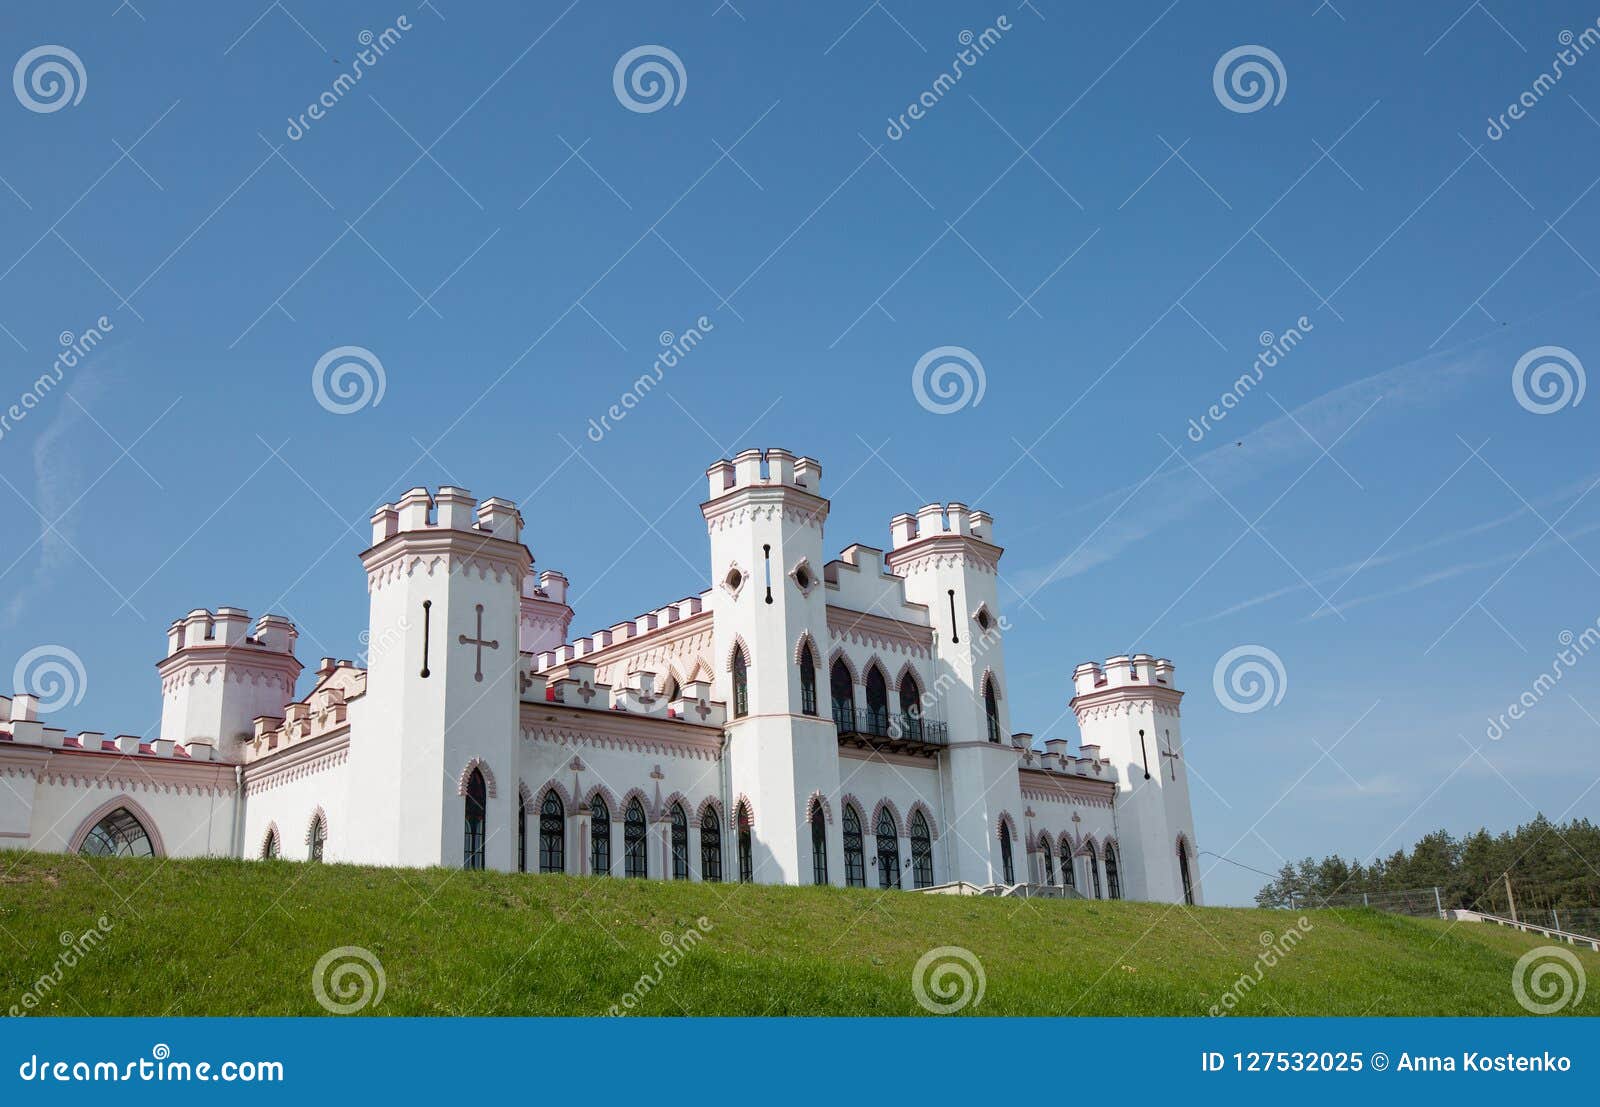 kossovo castle in belarus in may